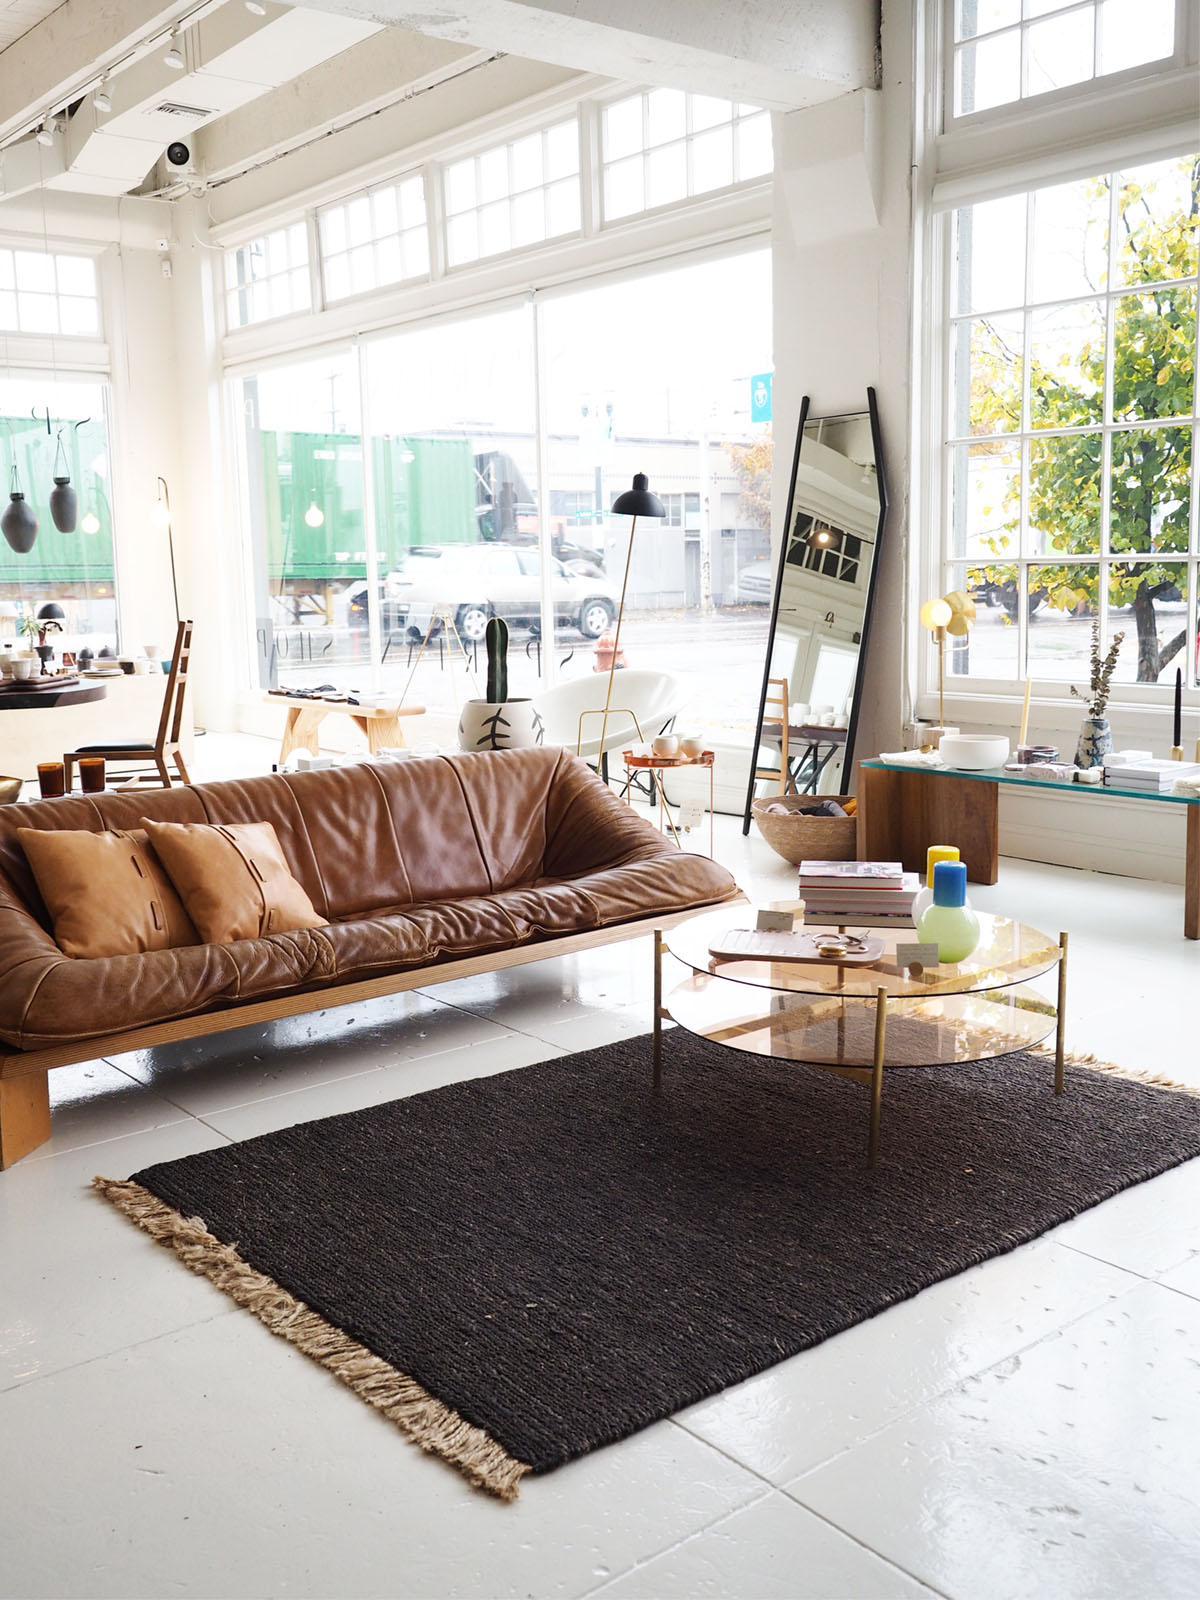 Spartan shop | our top five favorite home decor shops in portland on coco kelley